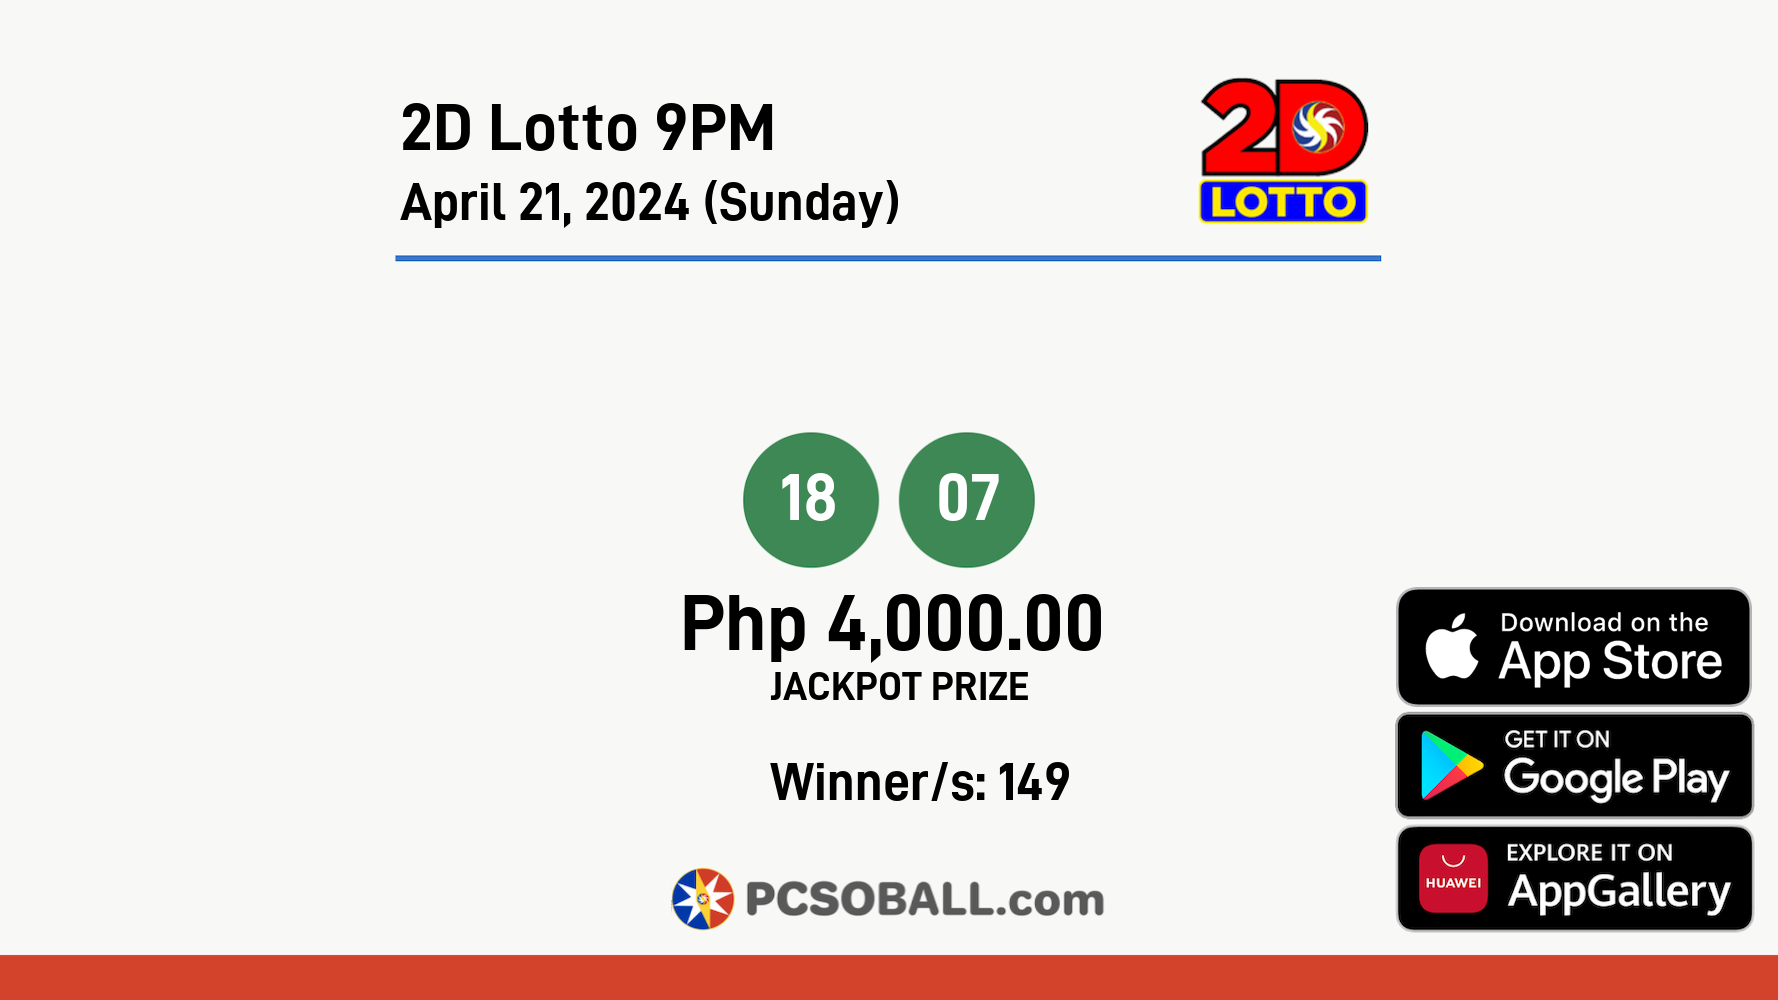 2D Lotto 9PM April 21, 2024 (Sunday) Result